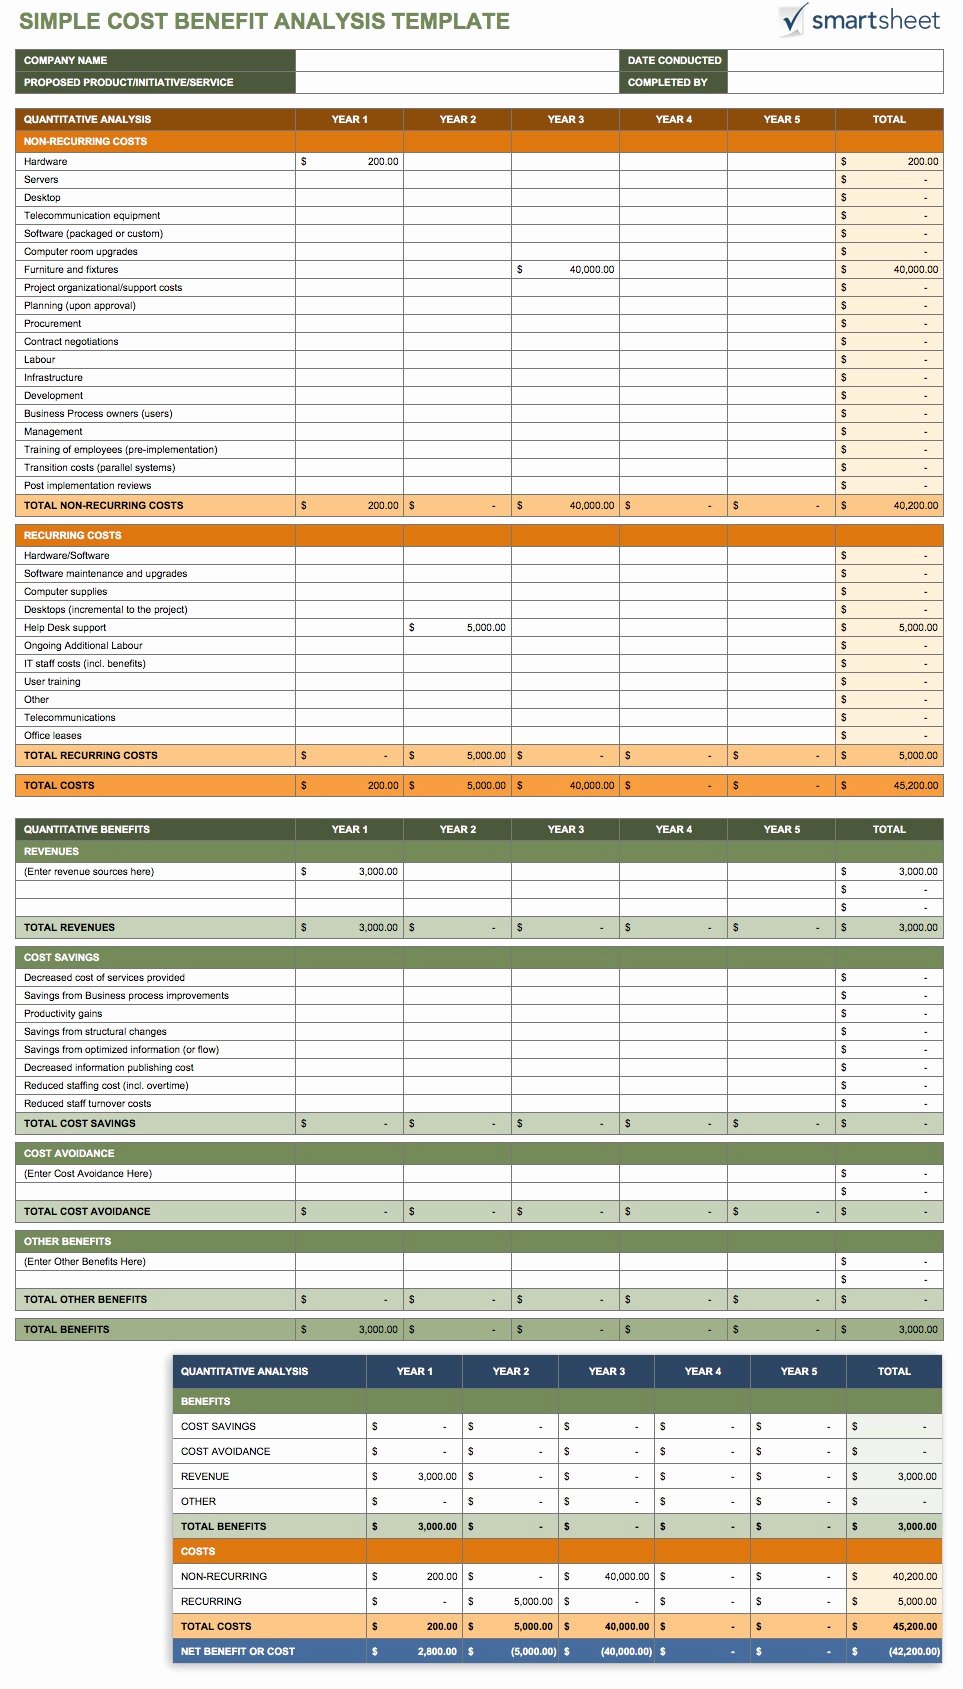 Cost Benefit Analysis Template Excel Luxury Cost Benefit Analysis Template Excel